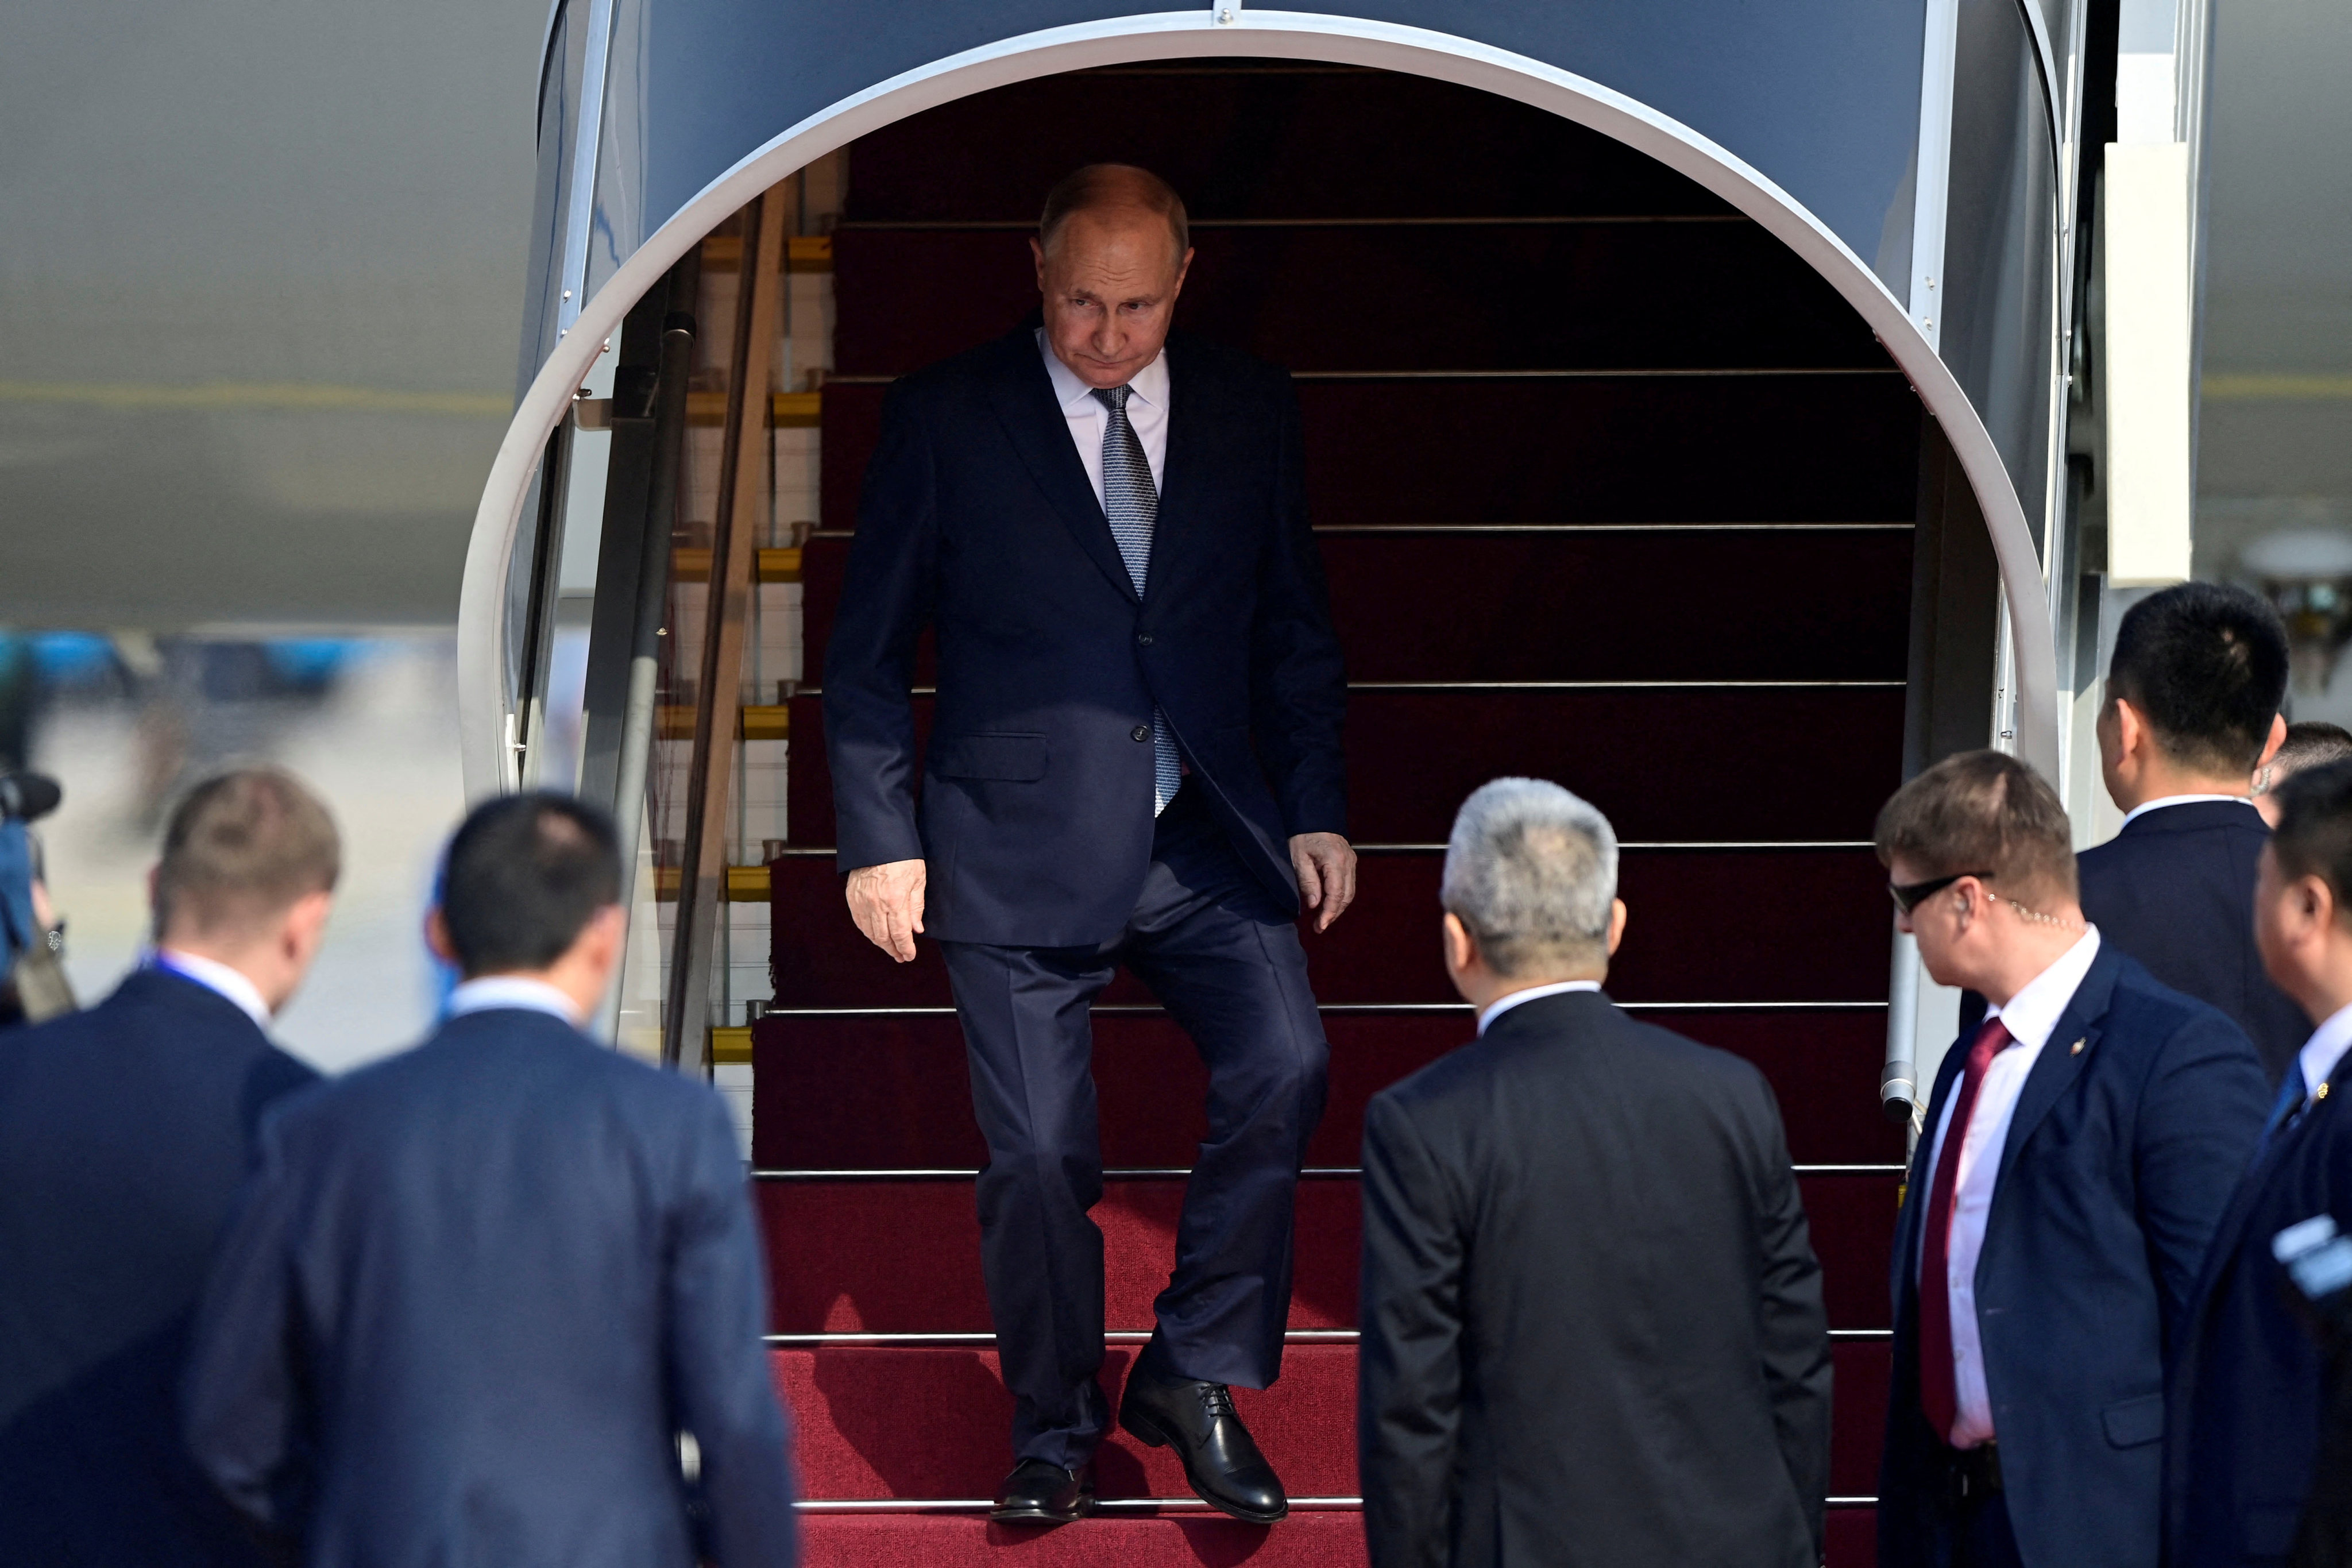 Russia’s President Vladimir Putin arrives in Beijing on Tuesday, his first trip outside the former Soviet Union since the ICC issued an arrest warrant for him over the war in Ukraine. Photo: via Reuters